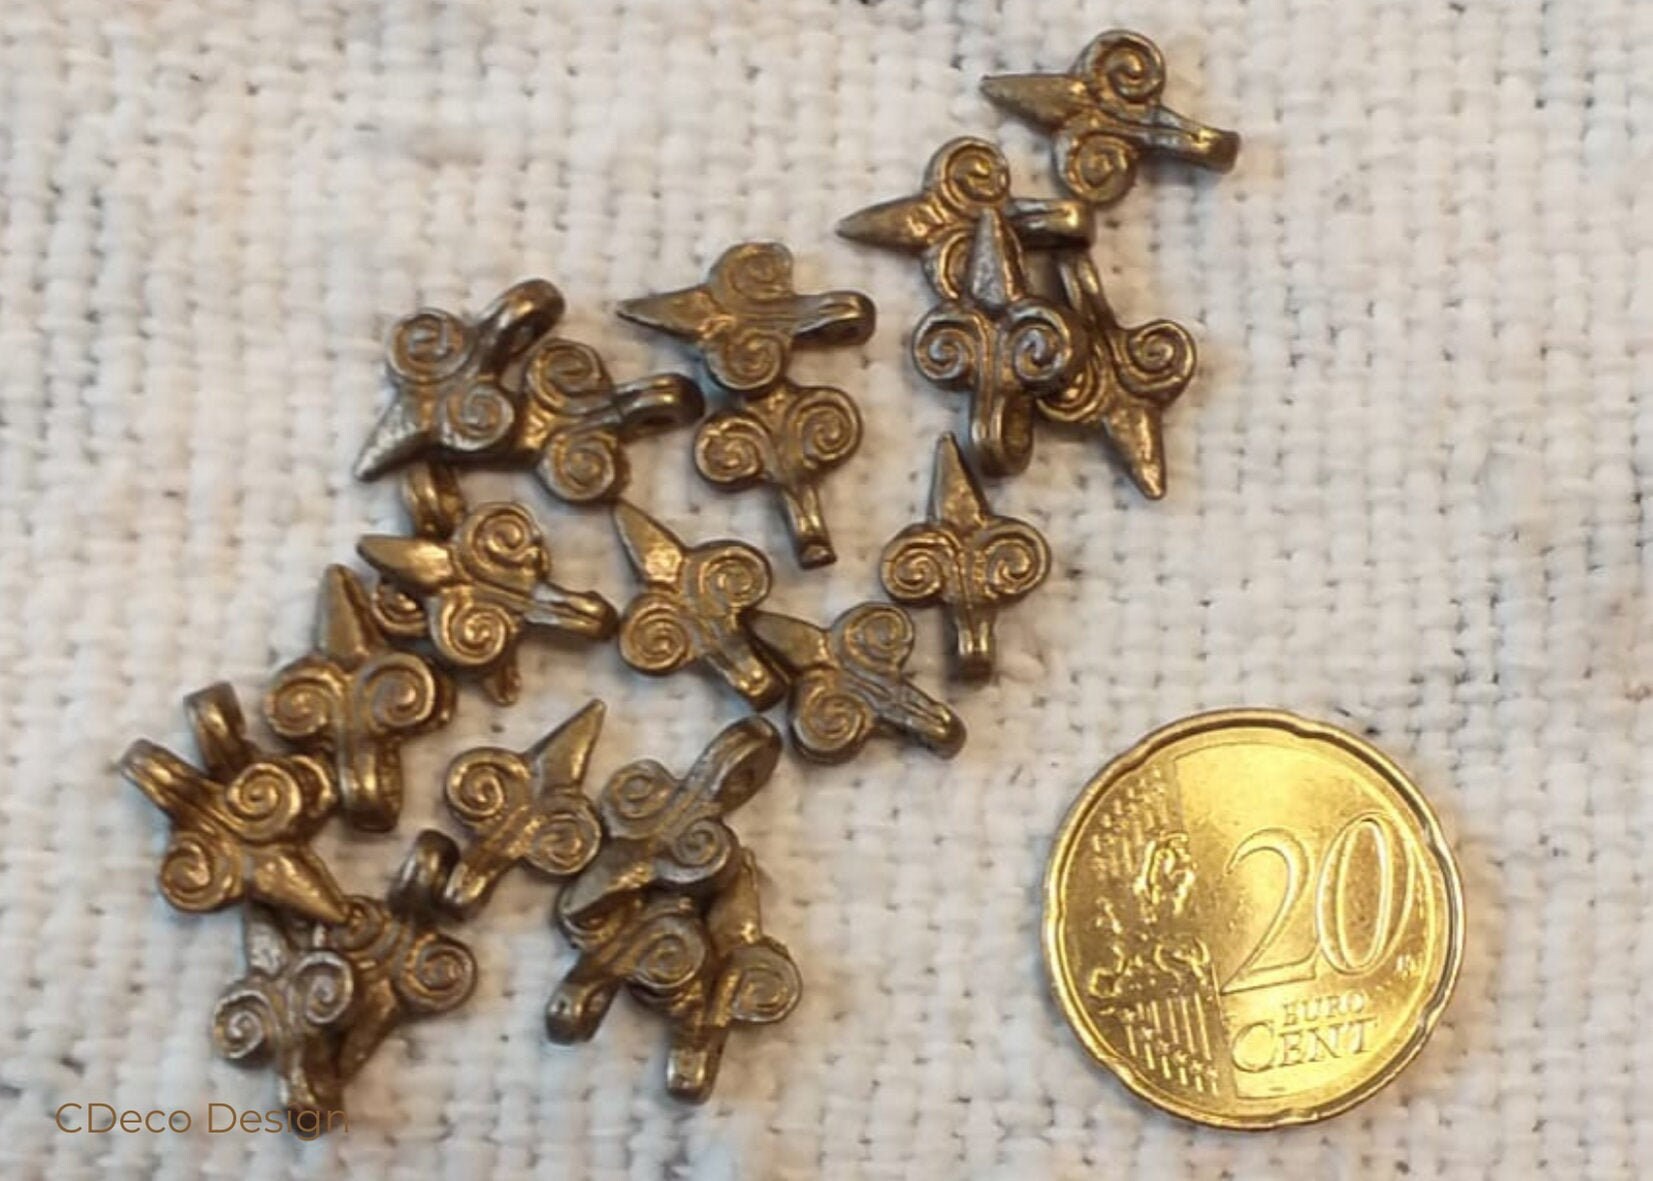 Pack of 20 bronze beads handmadeusing the lost wax technique